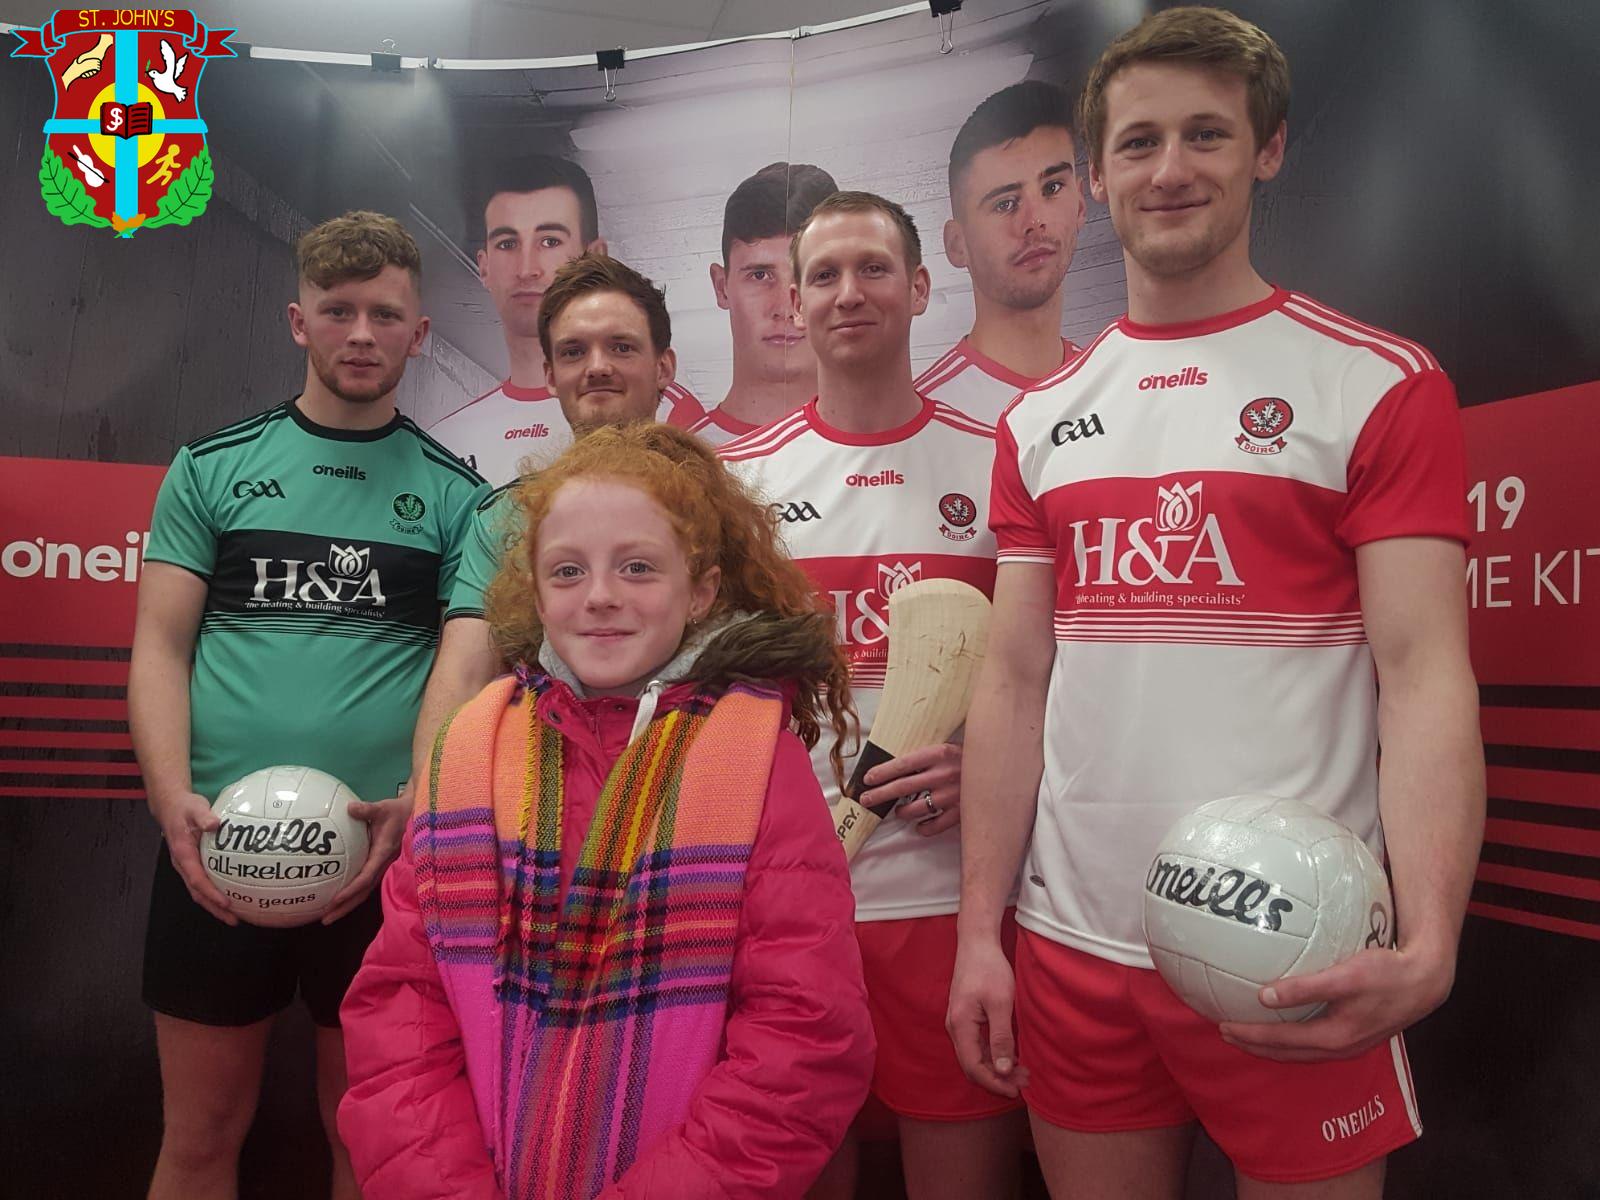 Briannagh at the launch of the New Doire GAA kit 2019  at the O'Neill's store in Waterloo Place